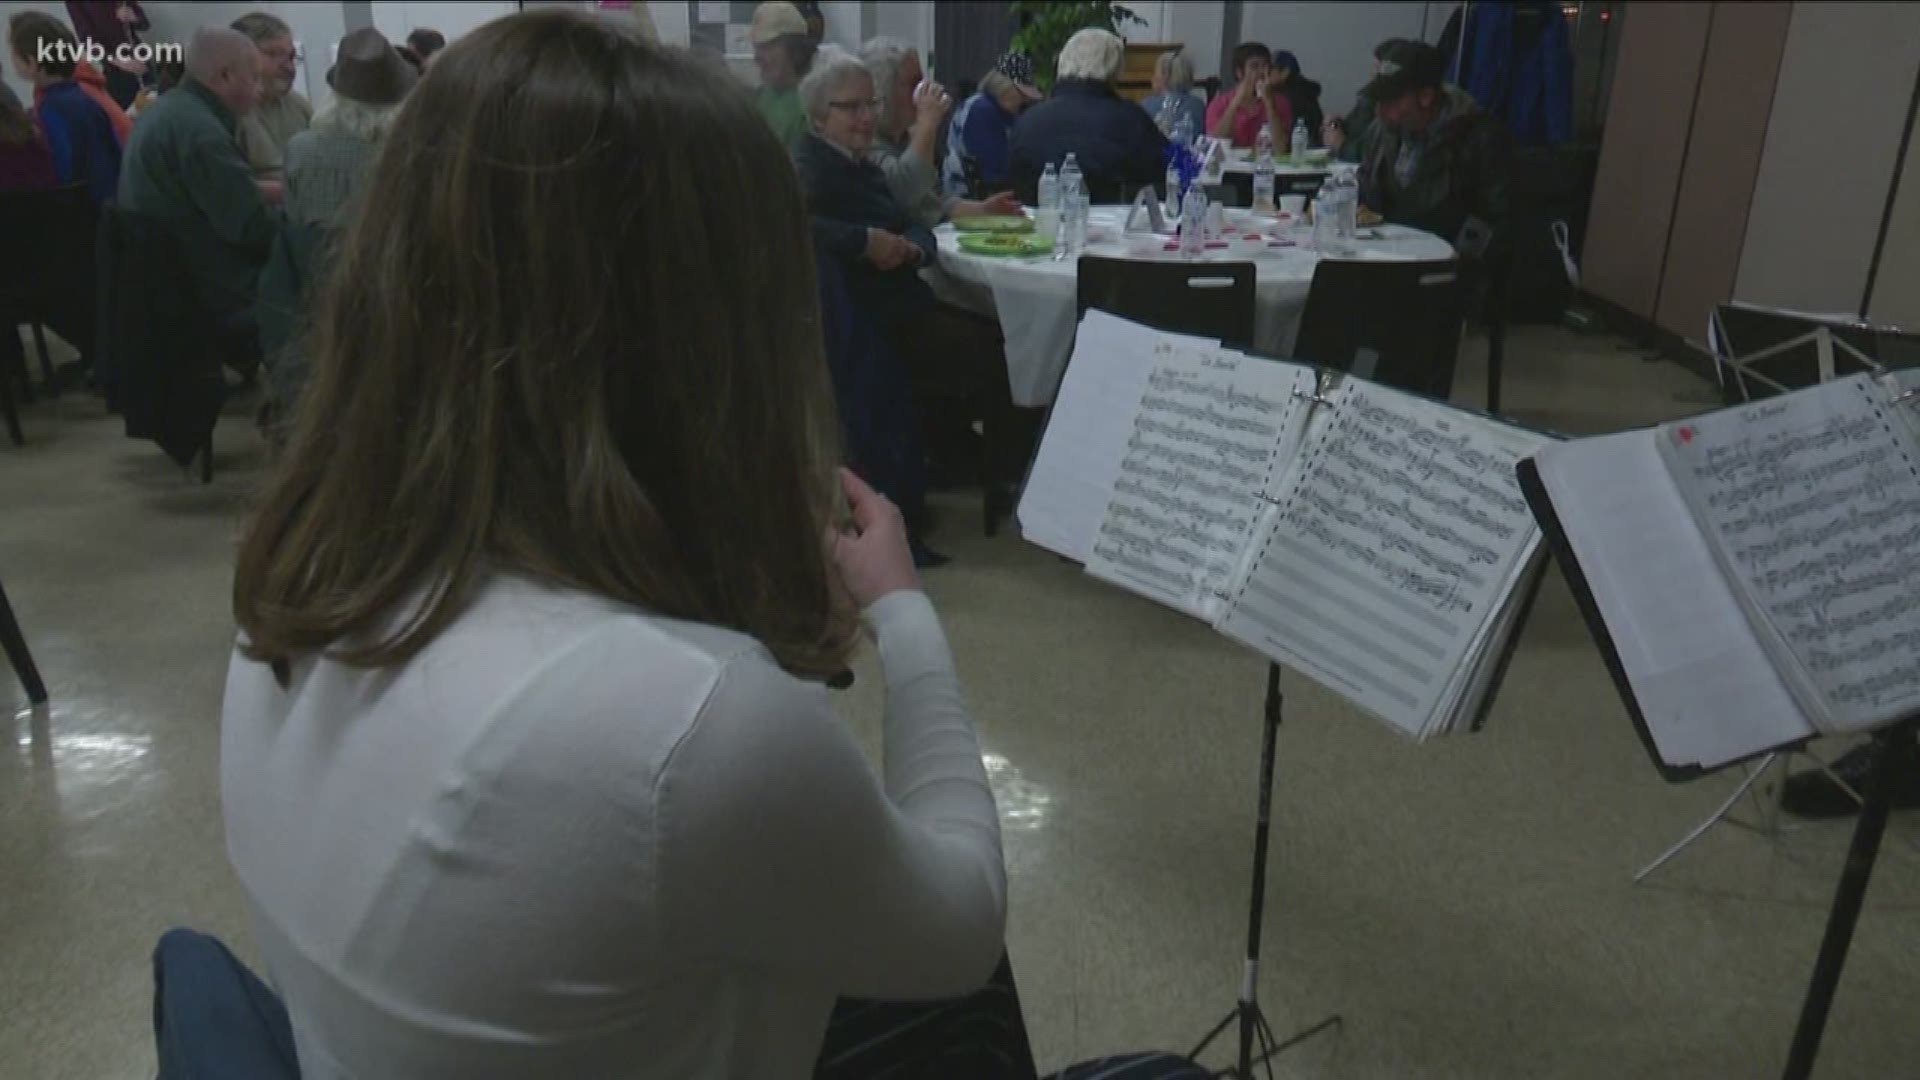 St. Vincent de Paul, Astegos and the Boise Philharmonic held a free dinner and performance Monday night to help lift federal employees' spirits as they struggle without a paycheck.